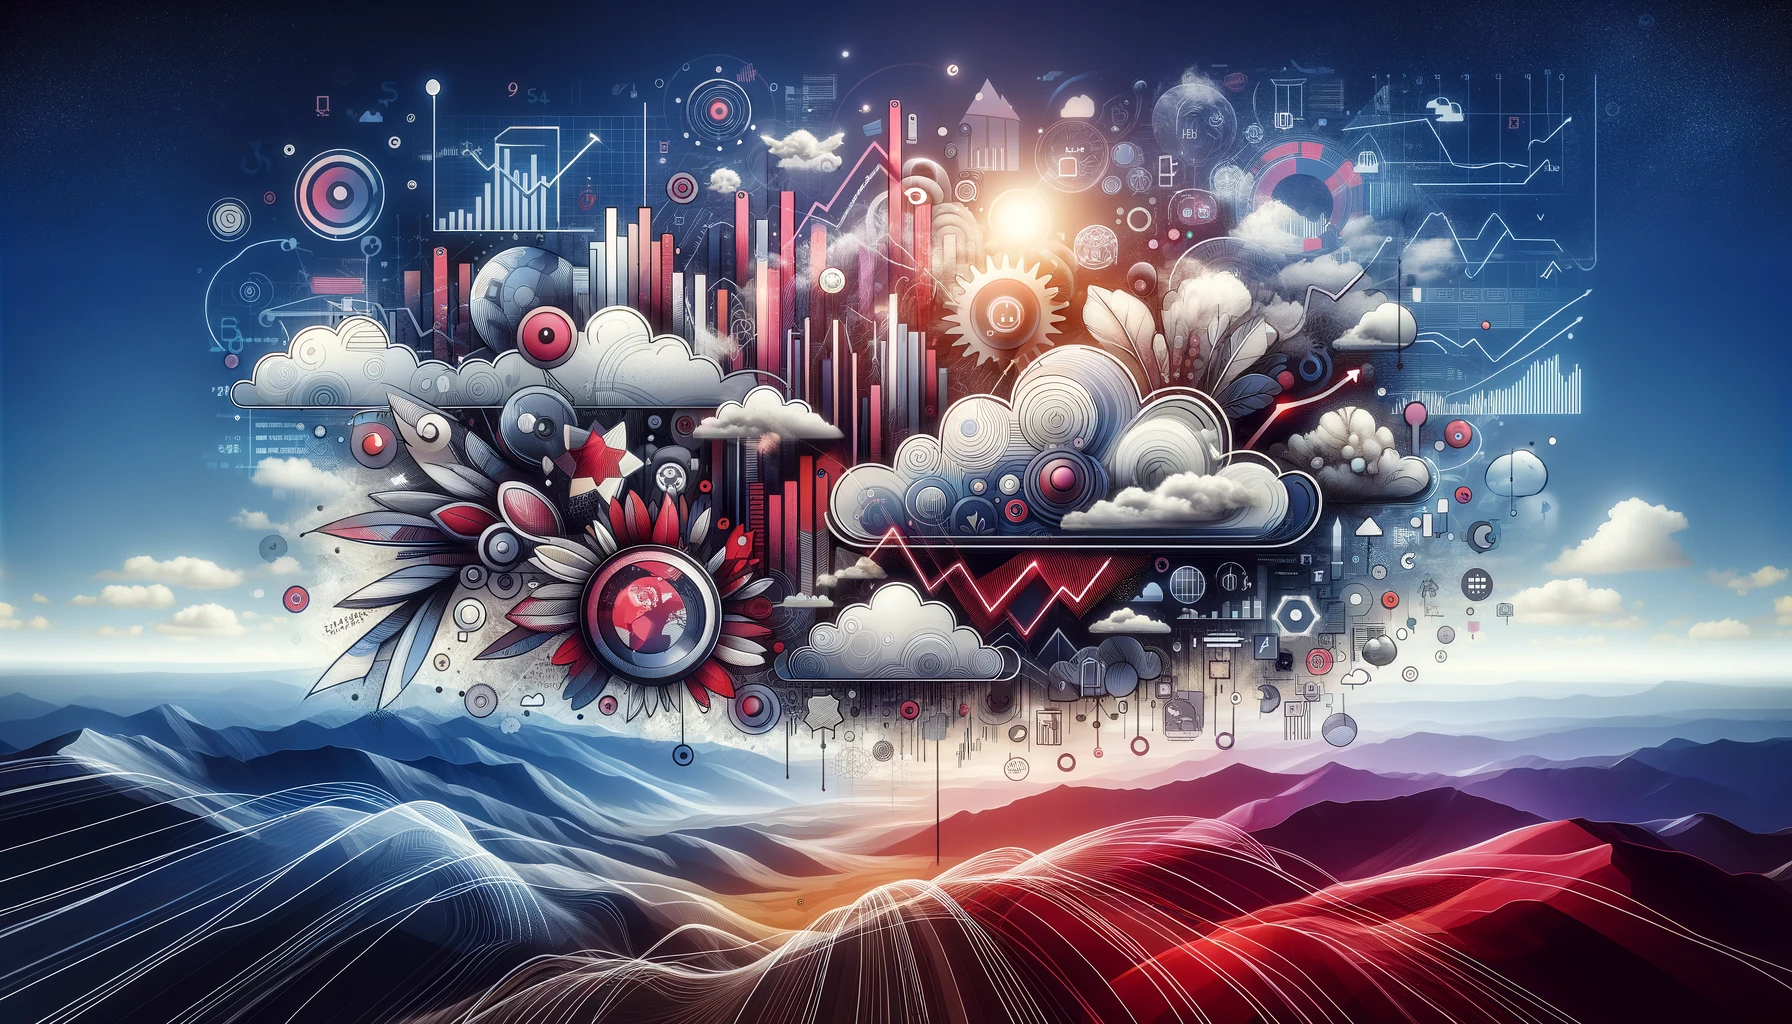 An artistic combination of digital creativity elements with financial symbols, capturing the essence of Adobe&rsquo;s role in the digital and corporate world.